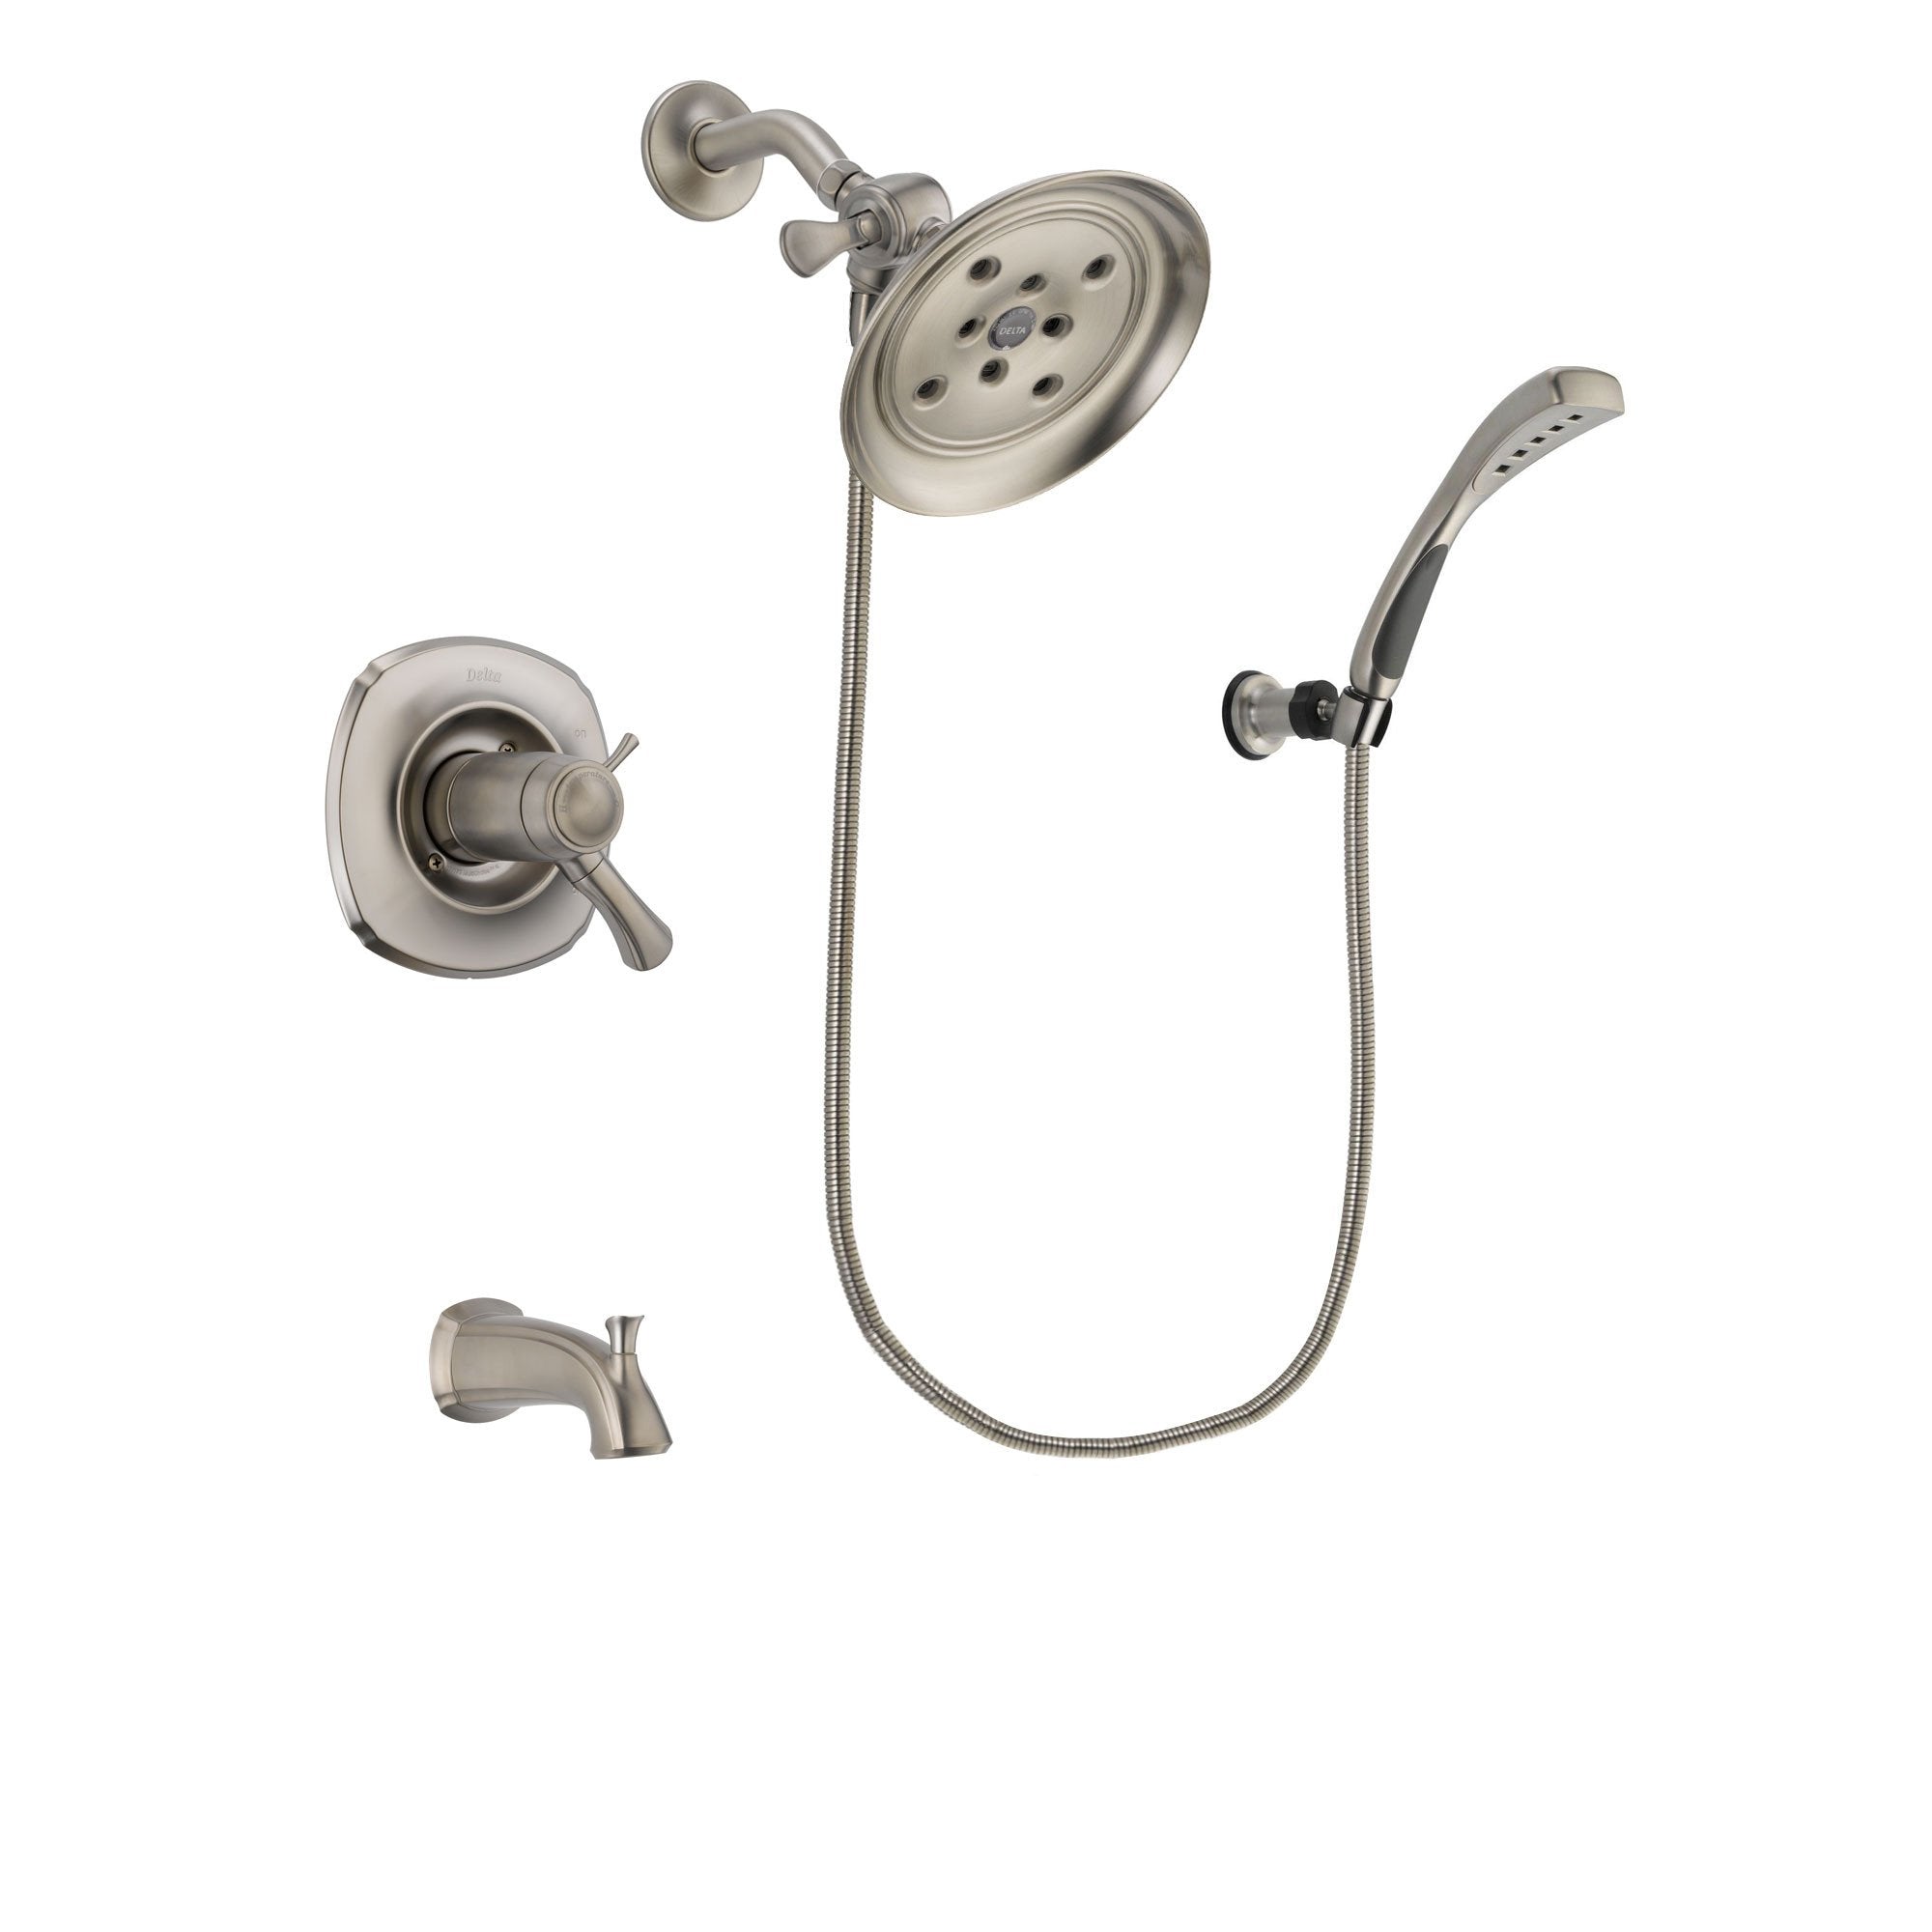 Delta Addison Stainless Steel Finish Thermostatic Tub and Shower Faucet System Package with Large Rain Showerhead and Wall Mounted Handshower Includes Rough-in Valve and Tub Spout DSP1859V